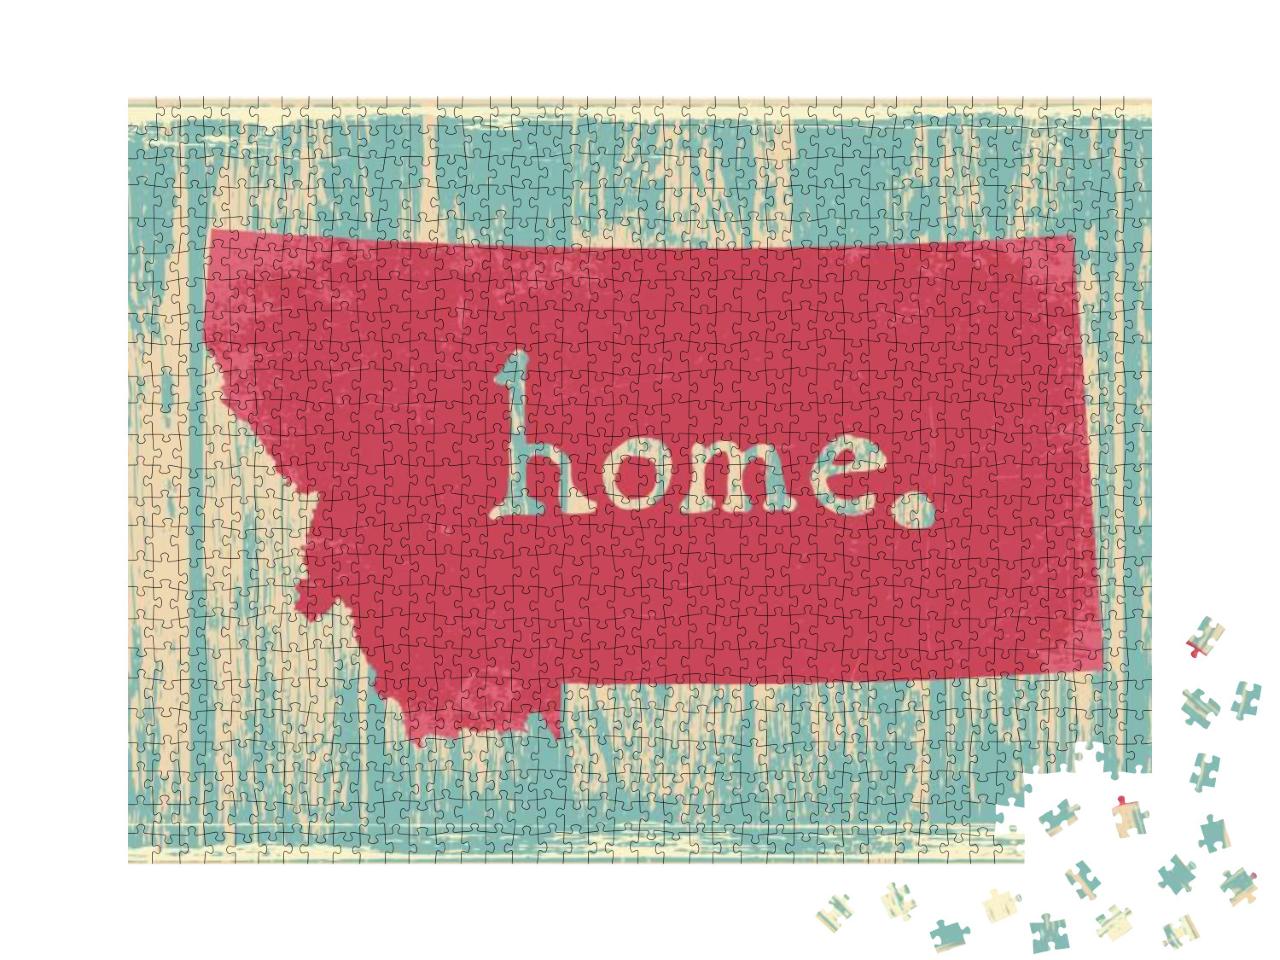 Montana Nostalgic Rustic Vintage State Vector Sign... Jigsaw Puzzle with 1000 pieces